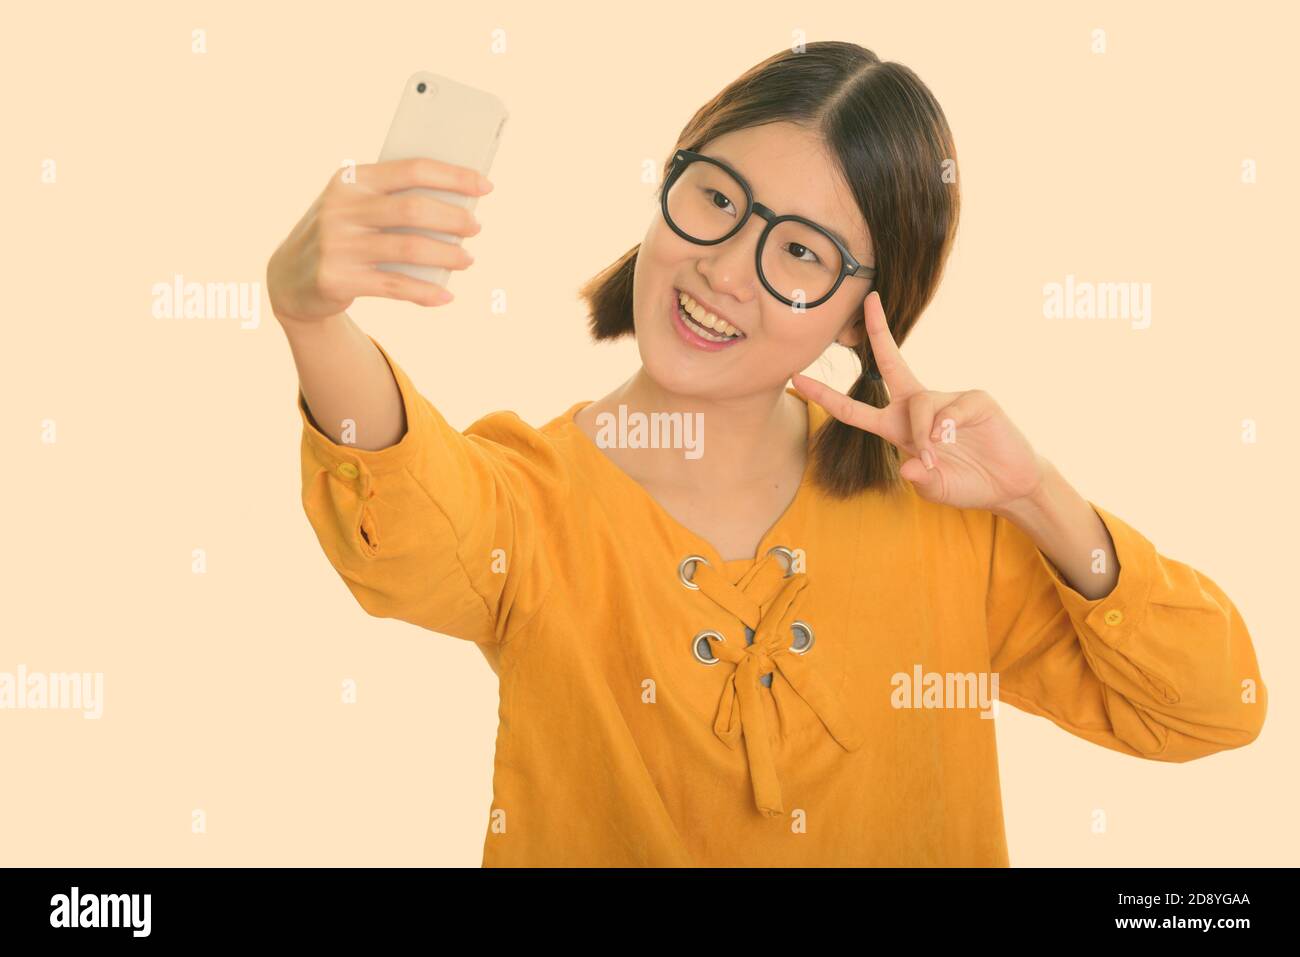 Young happy Asian woman smiling while taking selfie picture with mobile phone and giving peace sign Stock Photo